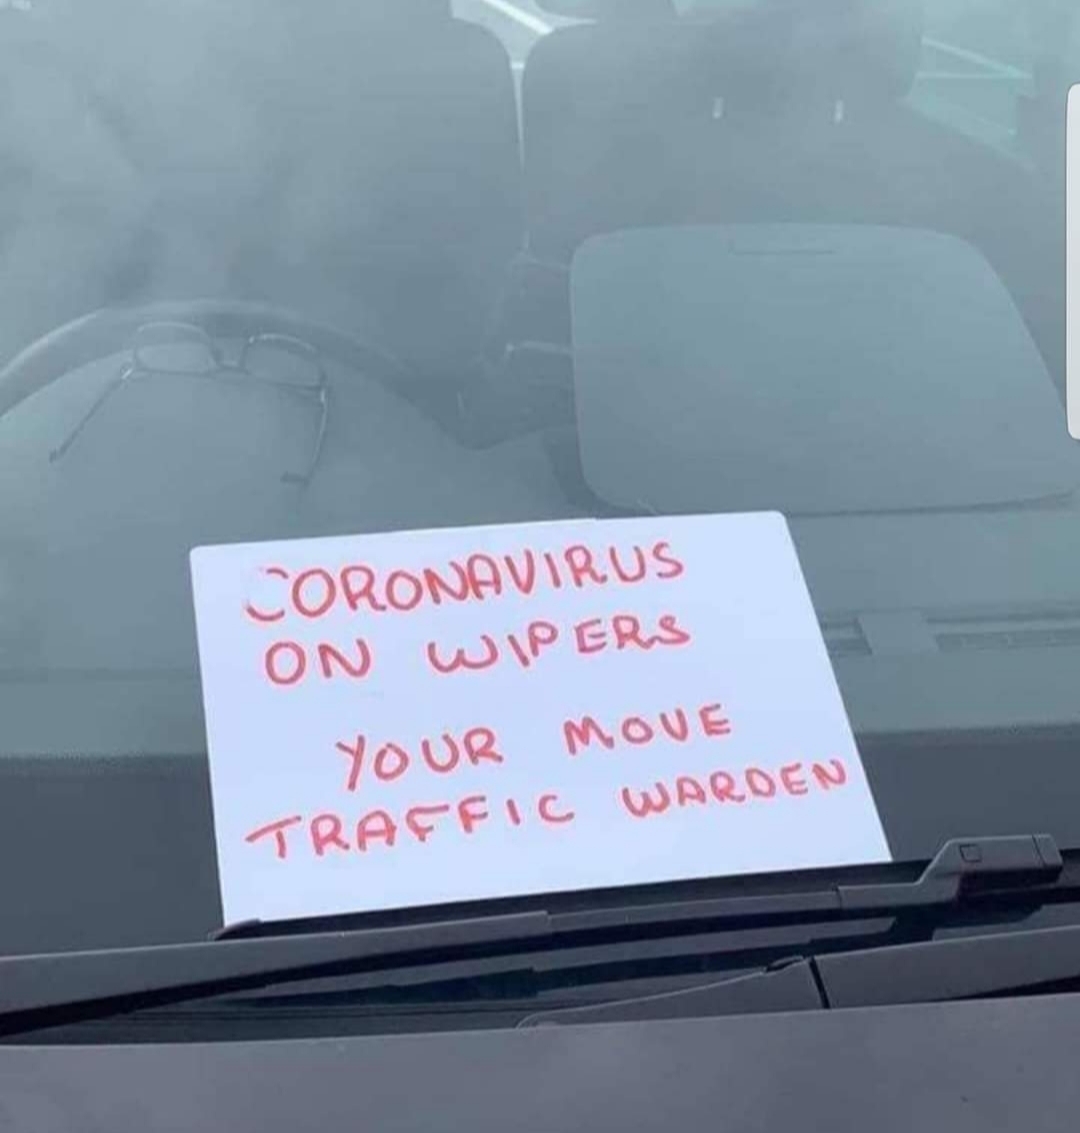 Well the traffic person can bugger off - meme